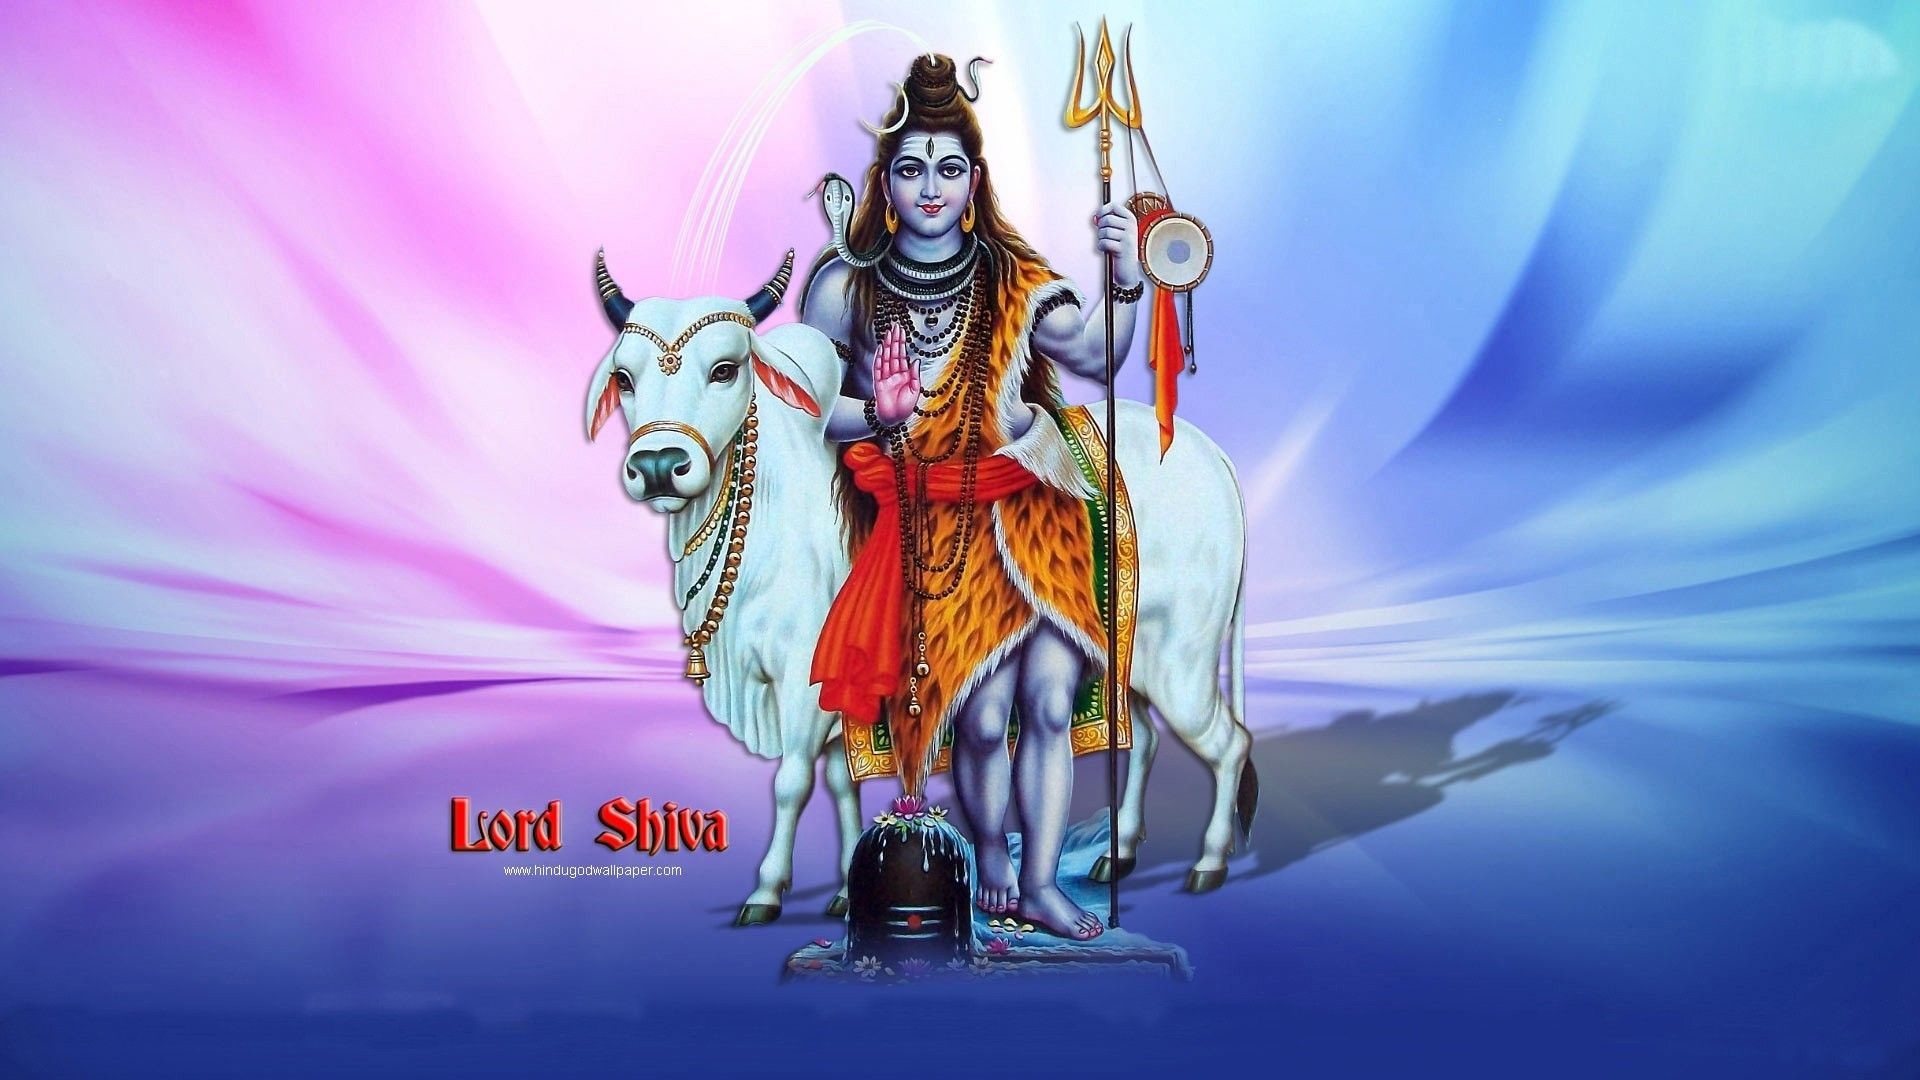 1920x1080  SHIVA HD WALLPAPERS, 1080P PICTURES, IMAGES HD